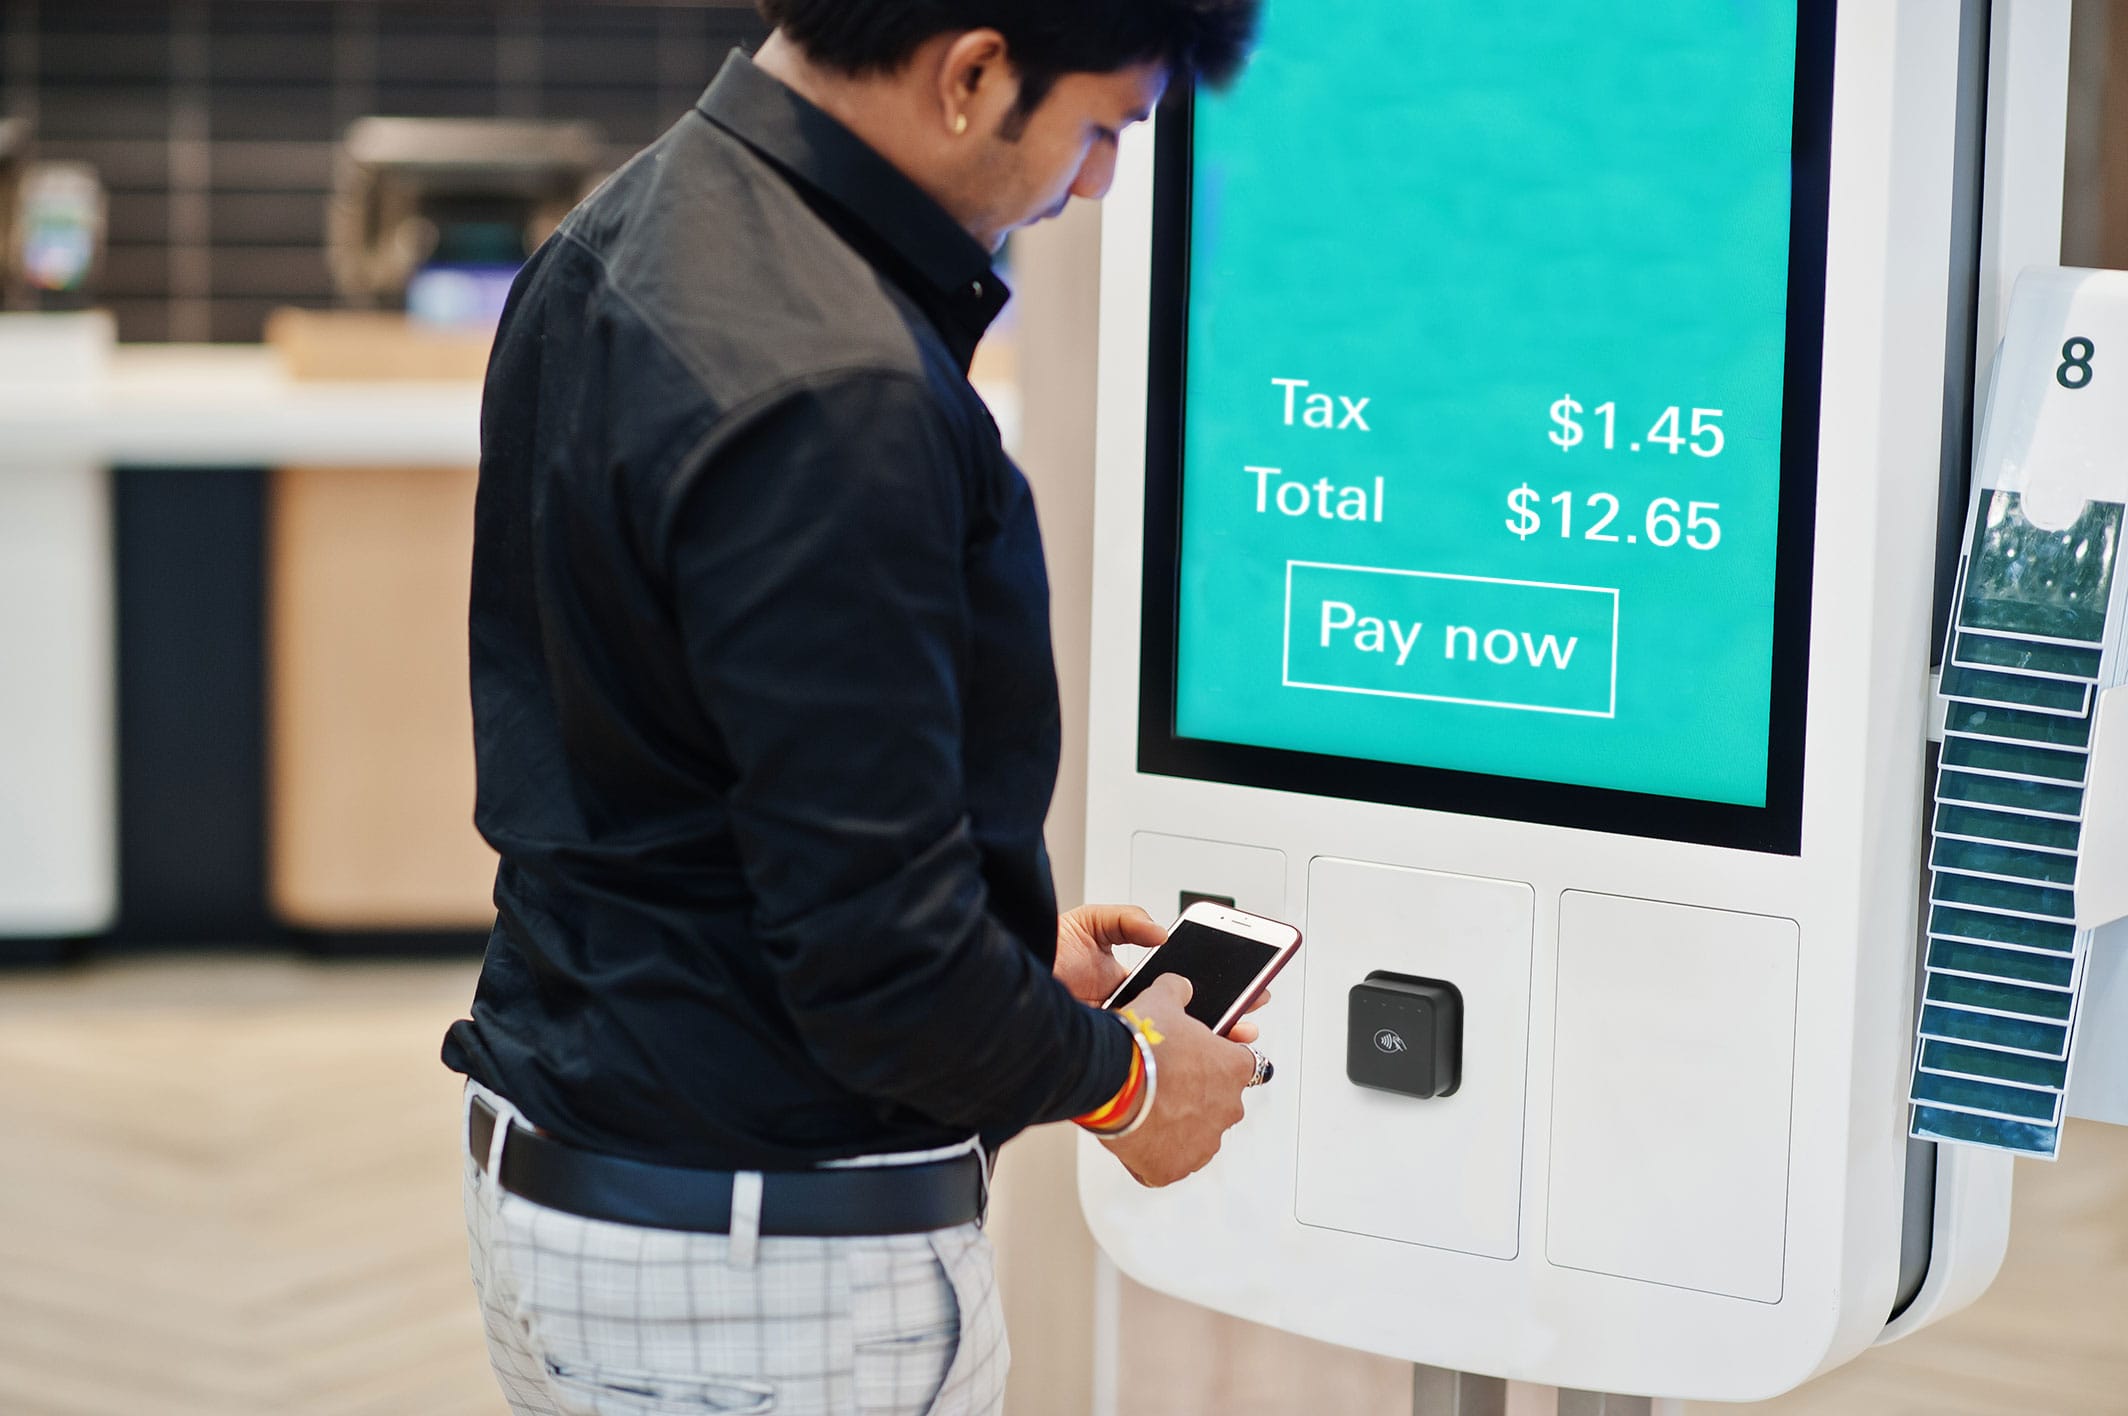 Use DynaWave to accept contactless payments in kiosks